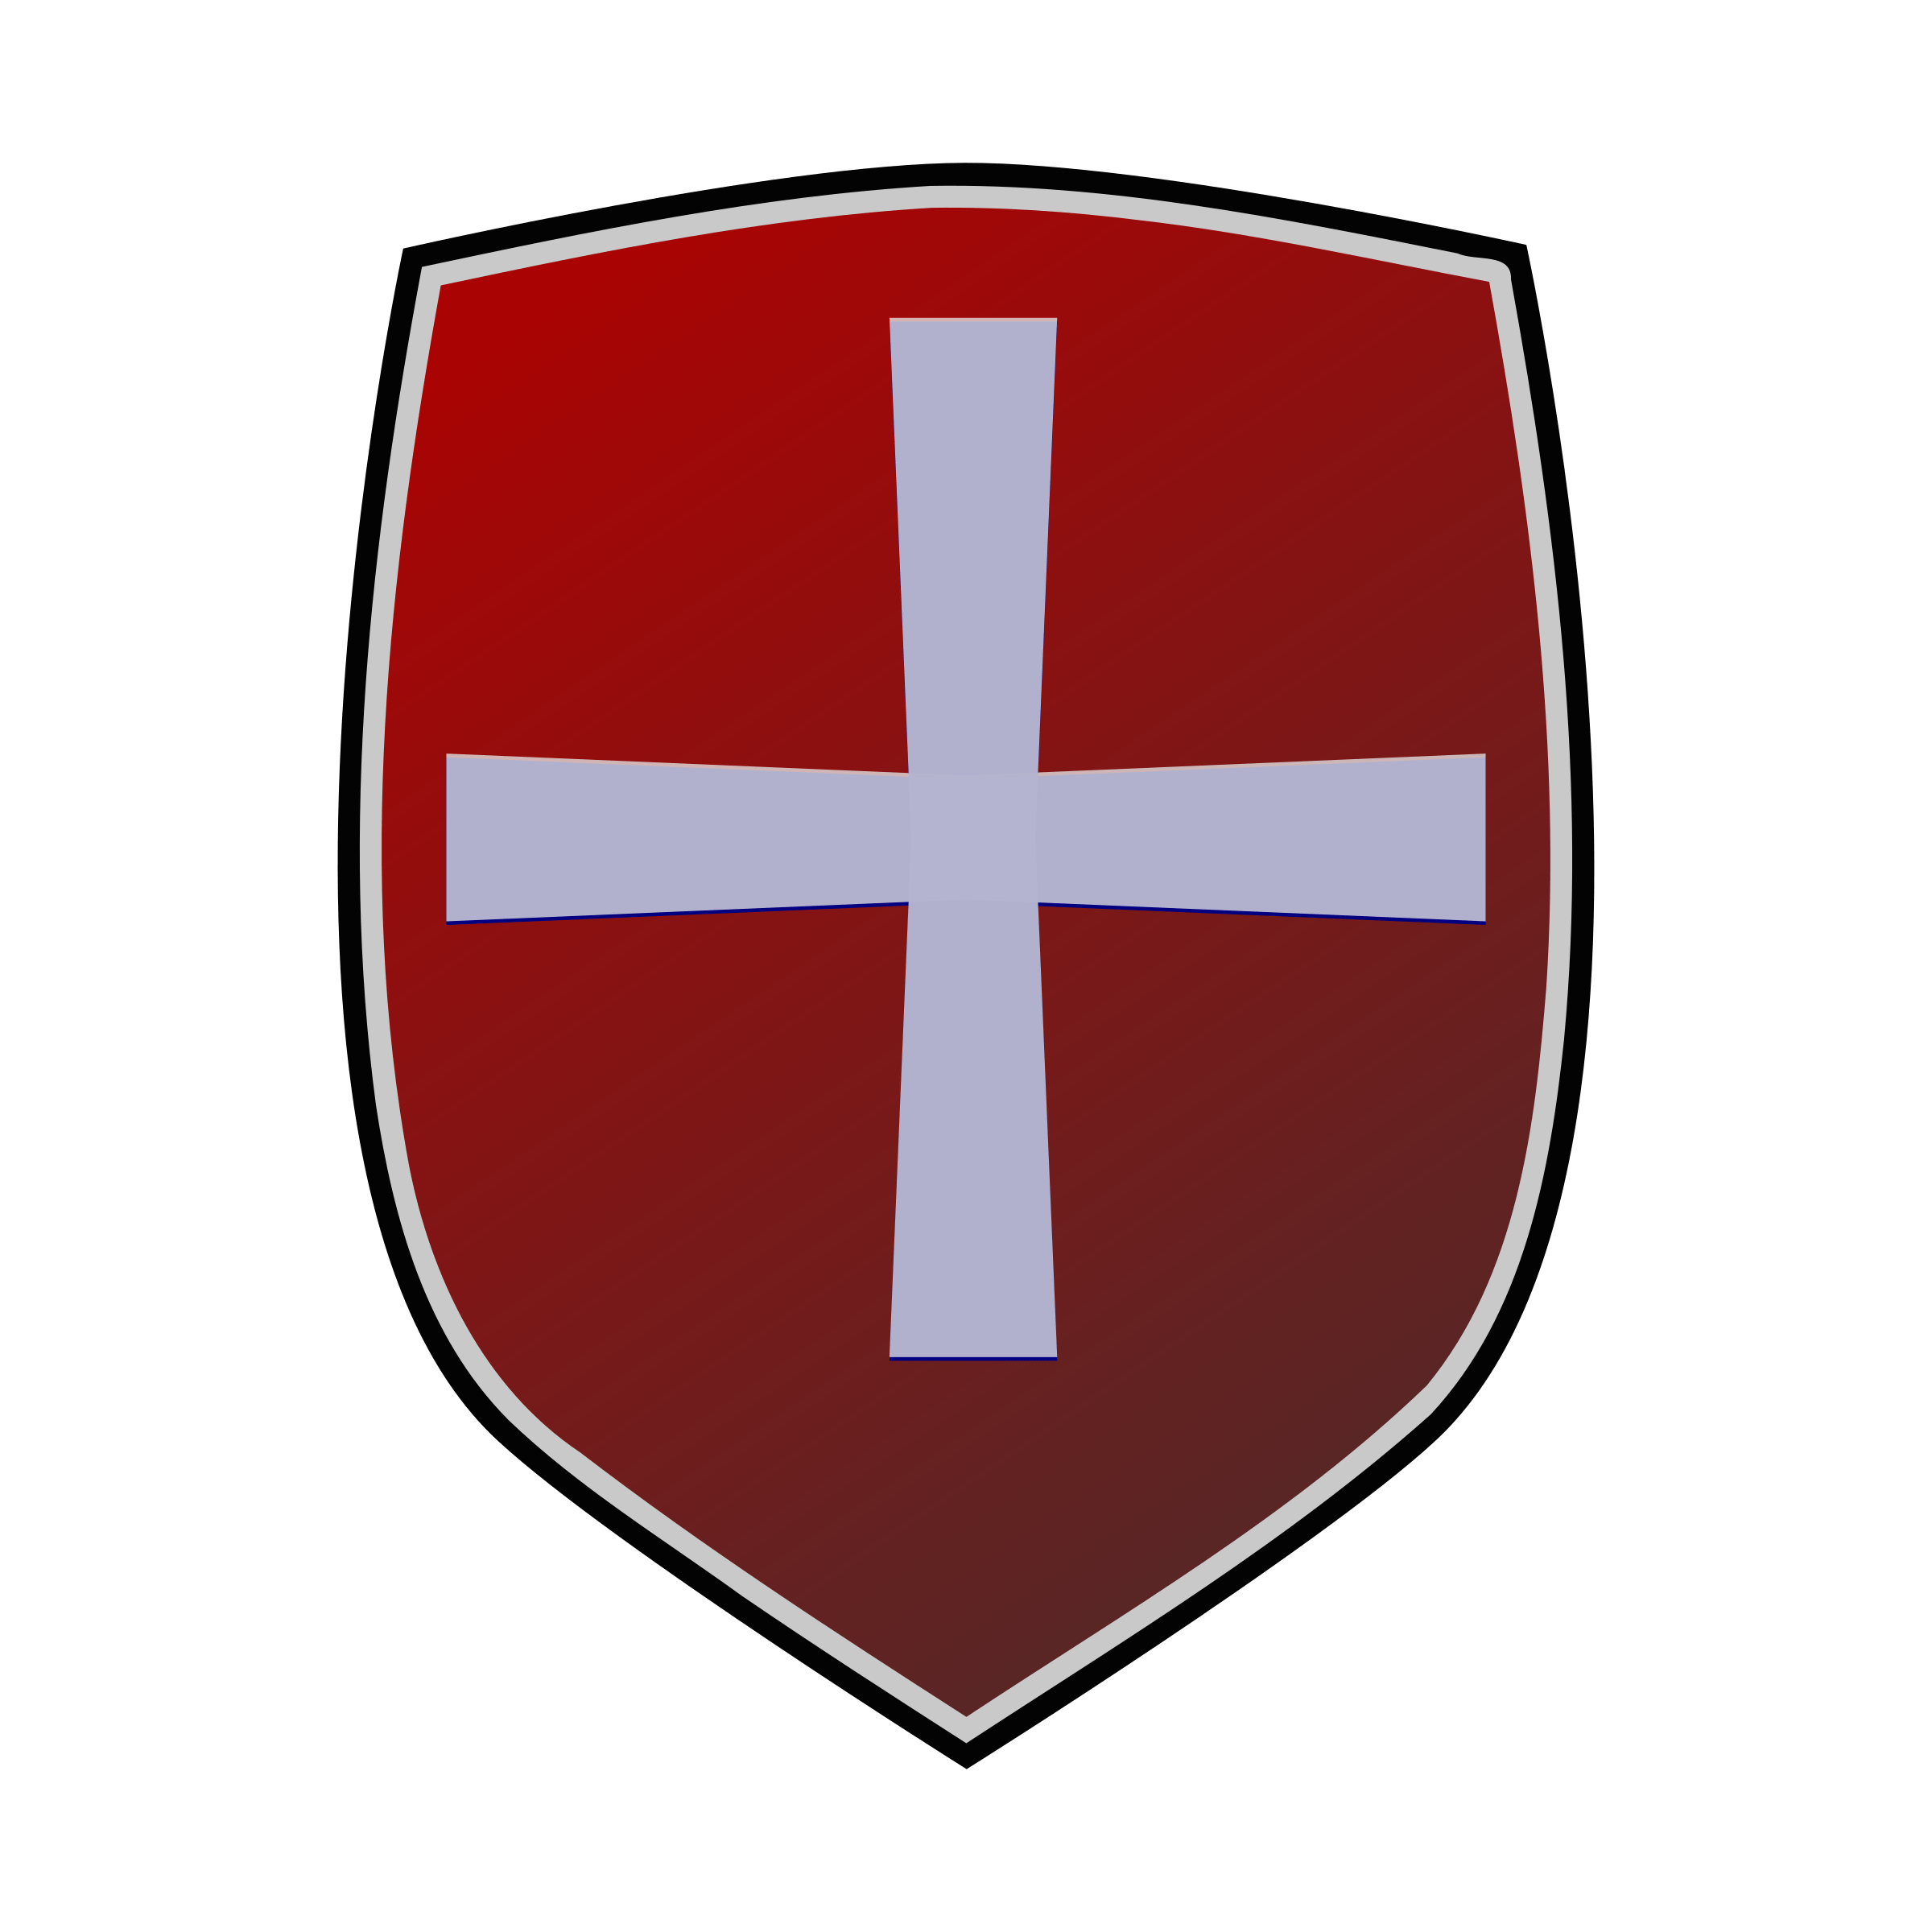 White Cross with Red Shield Logo - Clipart - Red shield